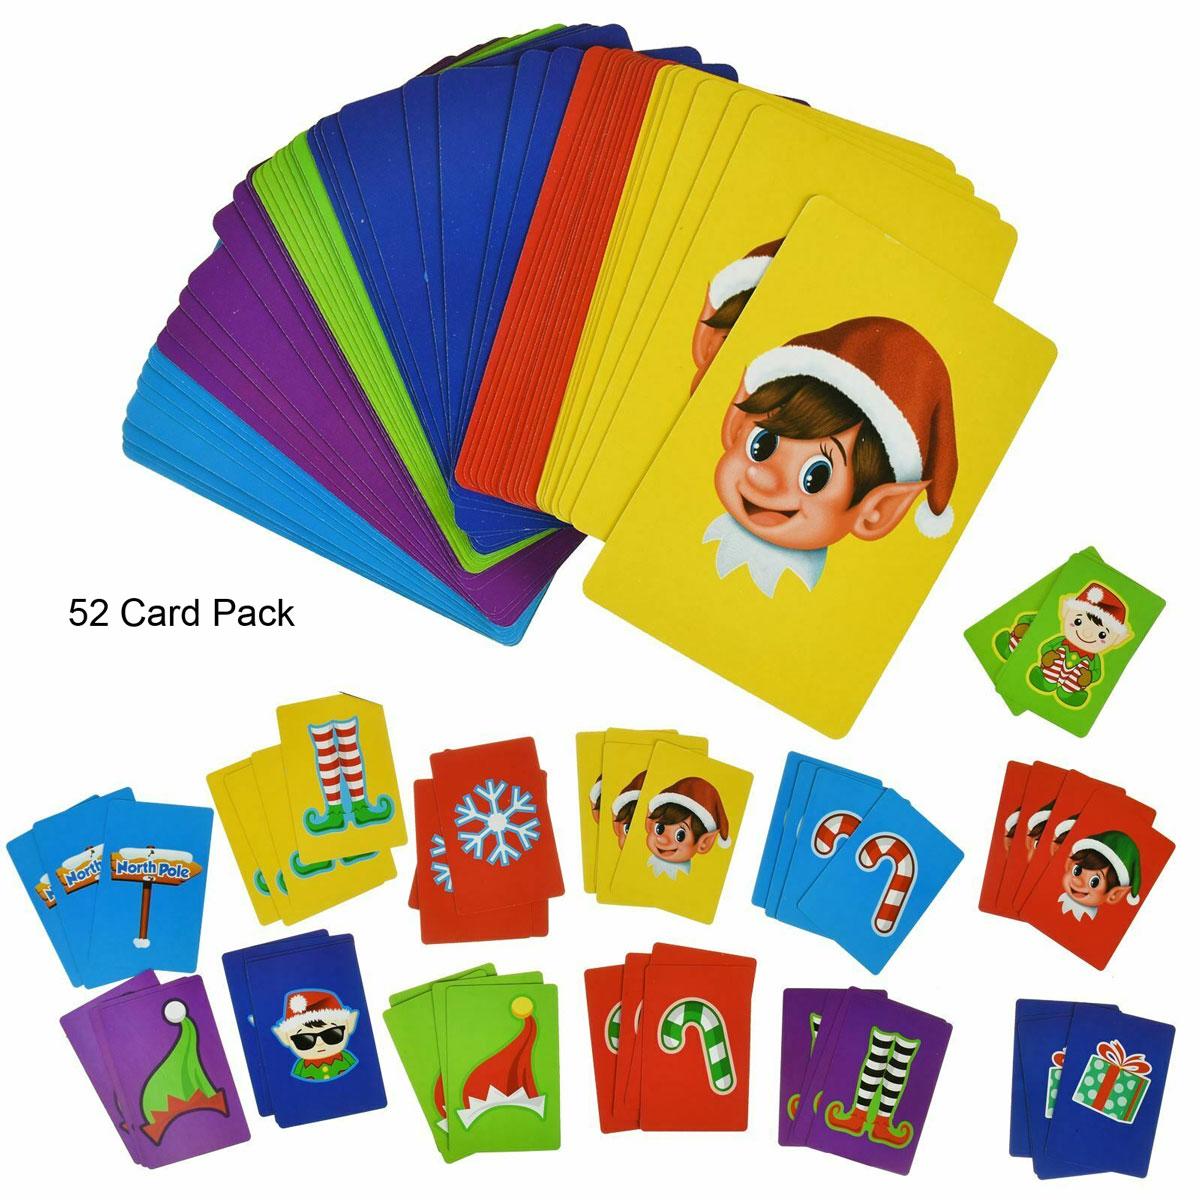 Elves Behaving Badly Jumbo Snap Card Game by PMS 380041 available here at Karnival Costumes online party shop